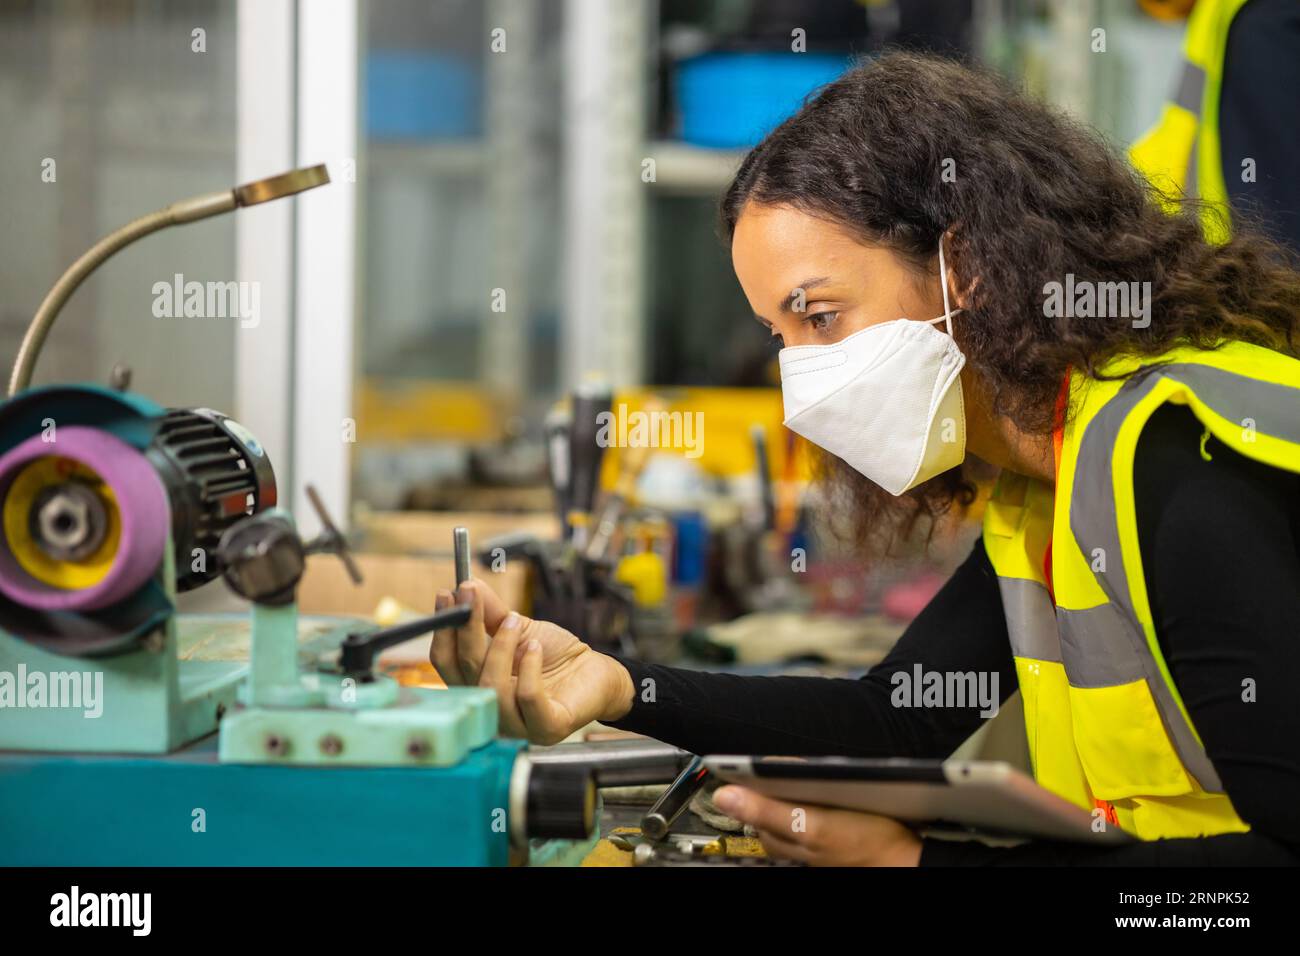 woman worker working in heavy metal industry workshop wearing facemask for hygiene healthy safety Stock Photo